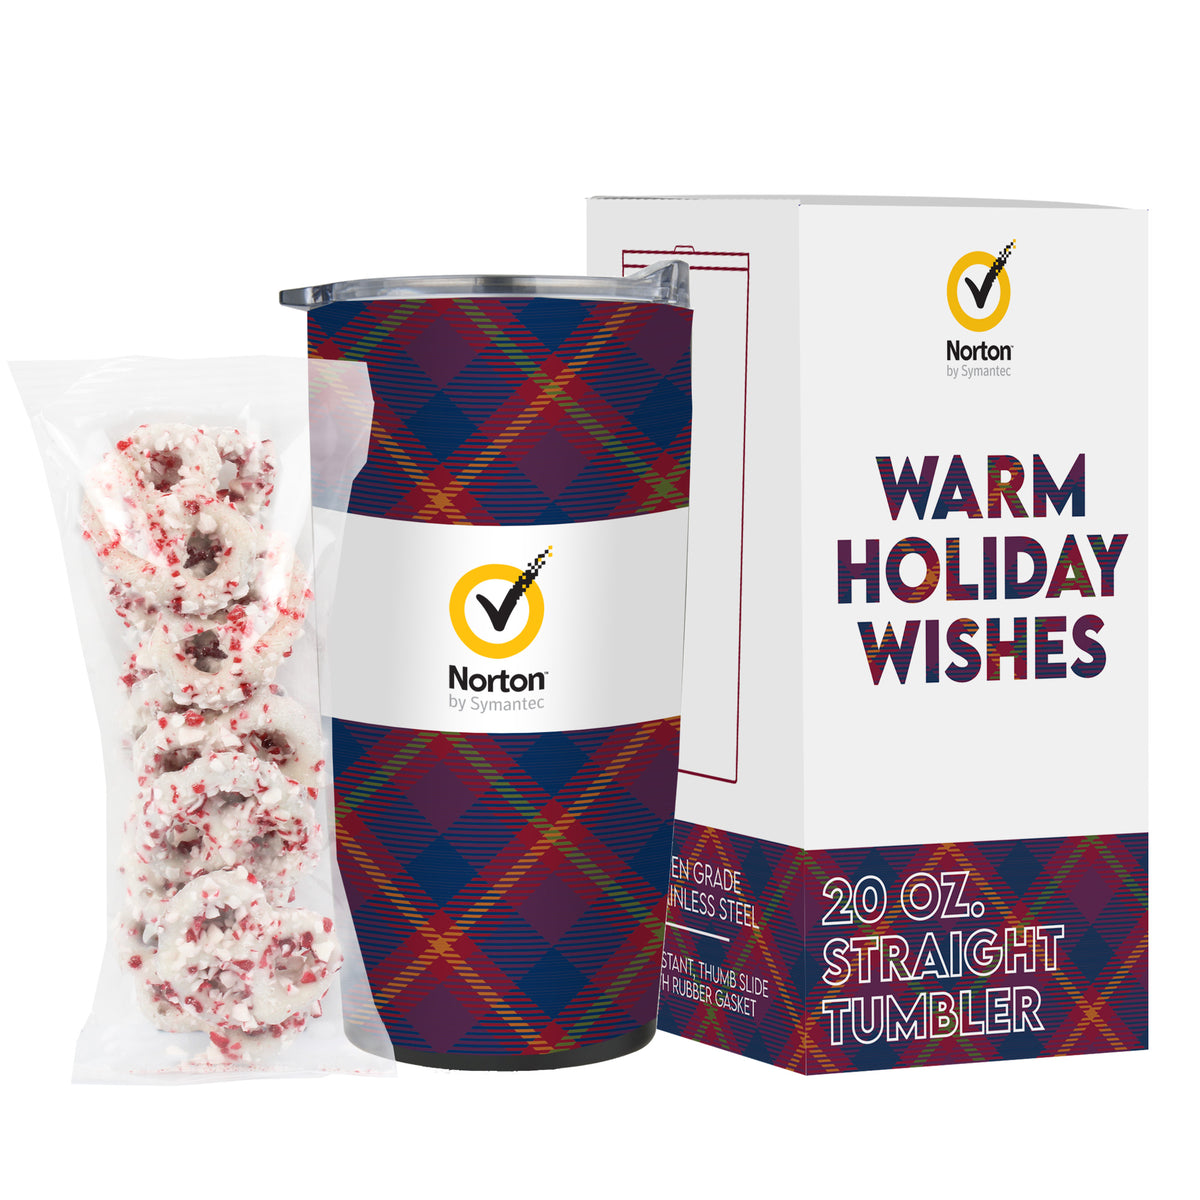 Straight Tumbler - 20 oz., Holiday Greetings Gift Set, White Chocolate Pretzels w/ Crushed Peppermint